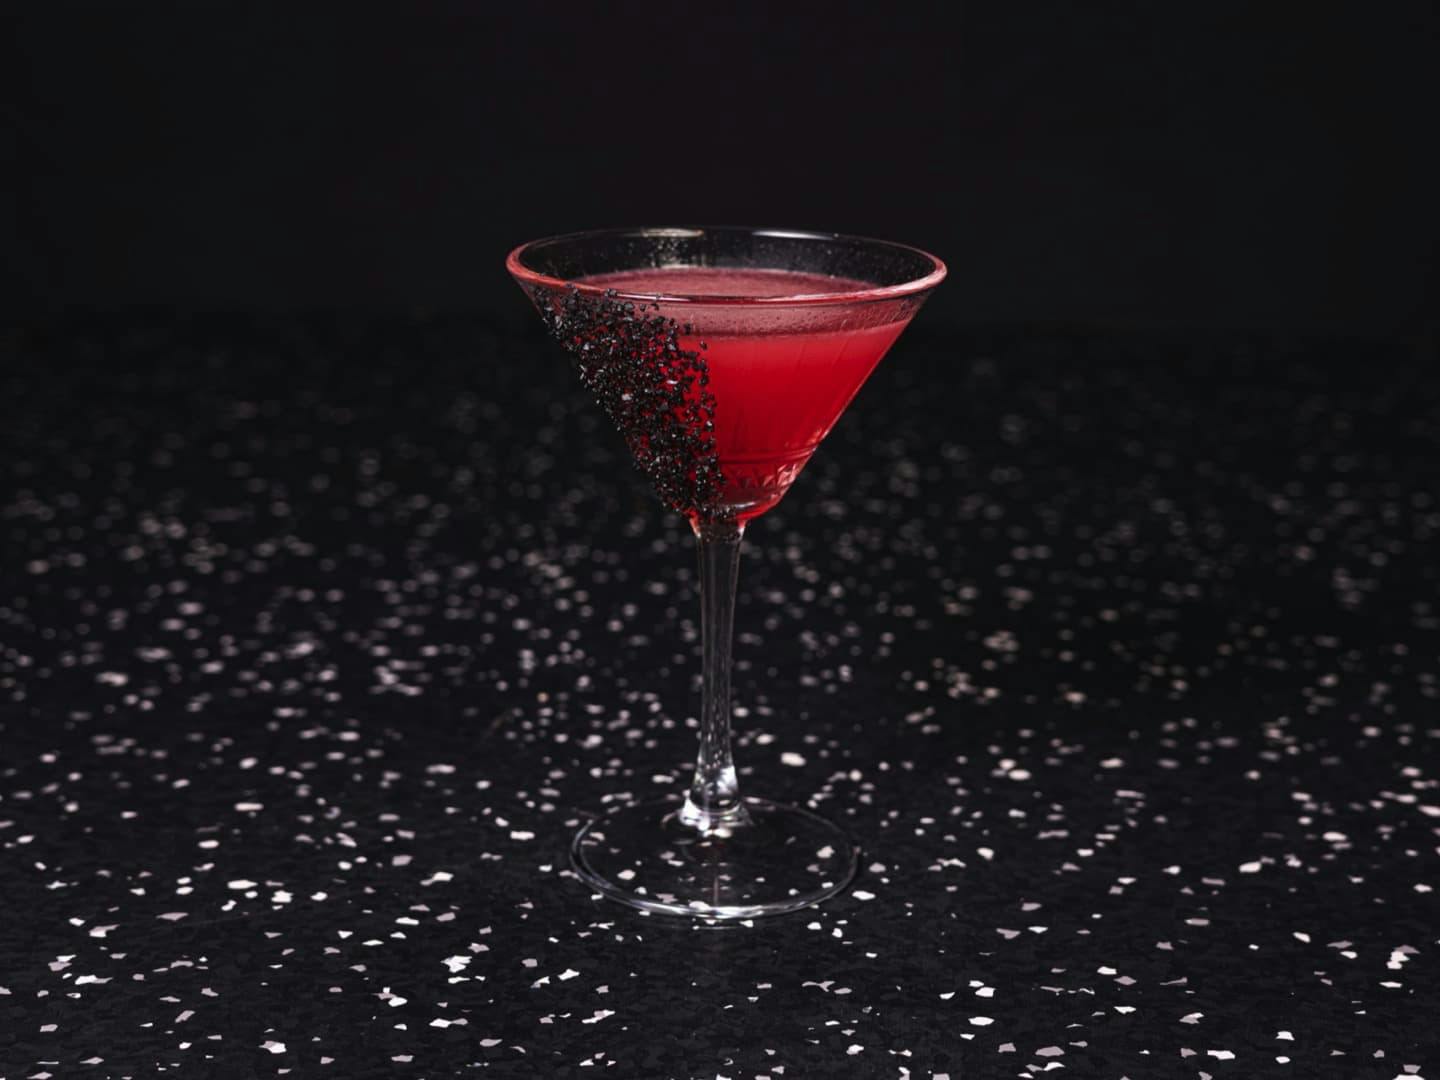 <p>We took Madame Tequila on a trip trough the tropics</p>
<p>Base: Tequila hibiscus, black Hawaiian salt, Triple Sec infused with pink berries</p>